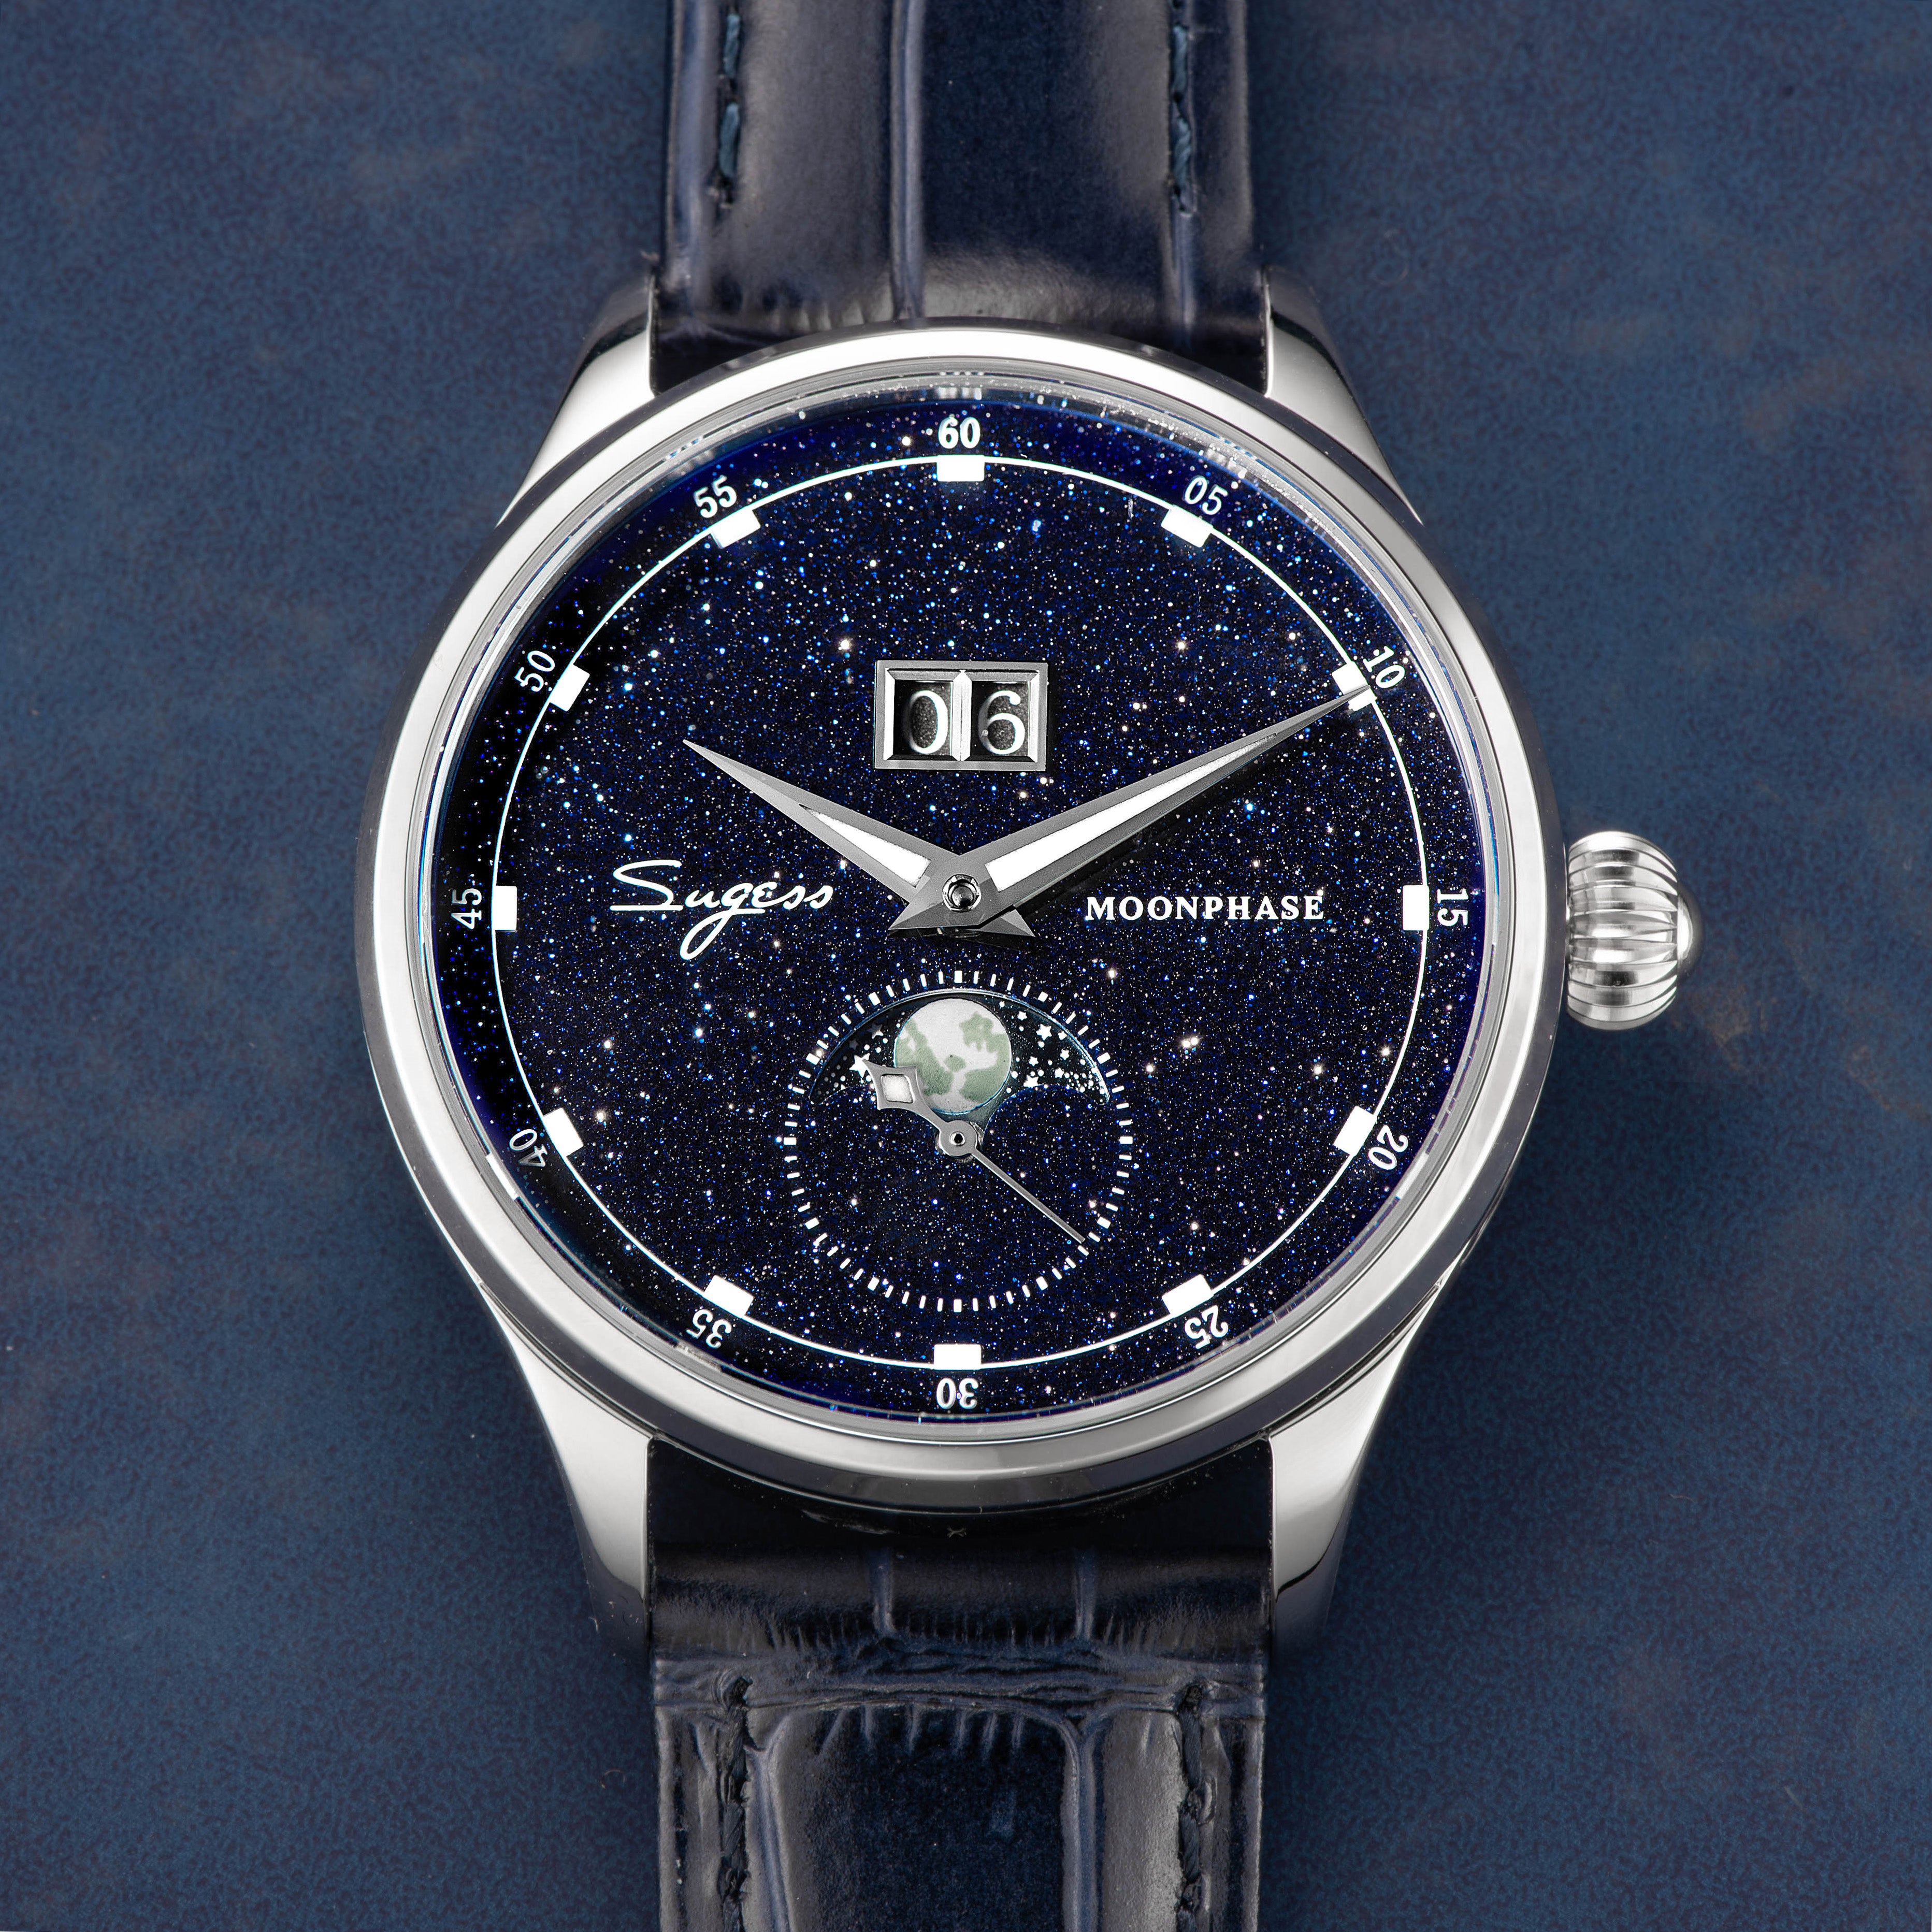 Sugess MOONPHASE MASTER Blue Gold Stone Star Dust Dial Moonphase 